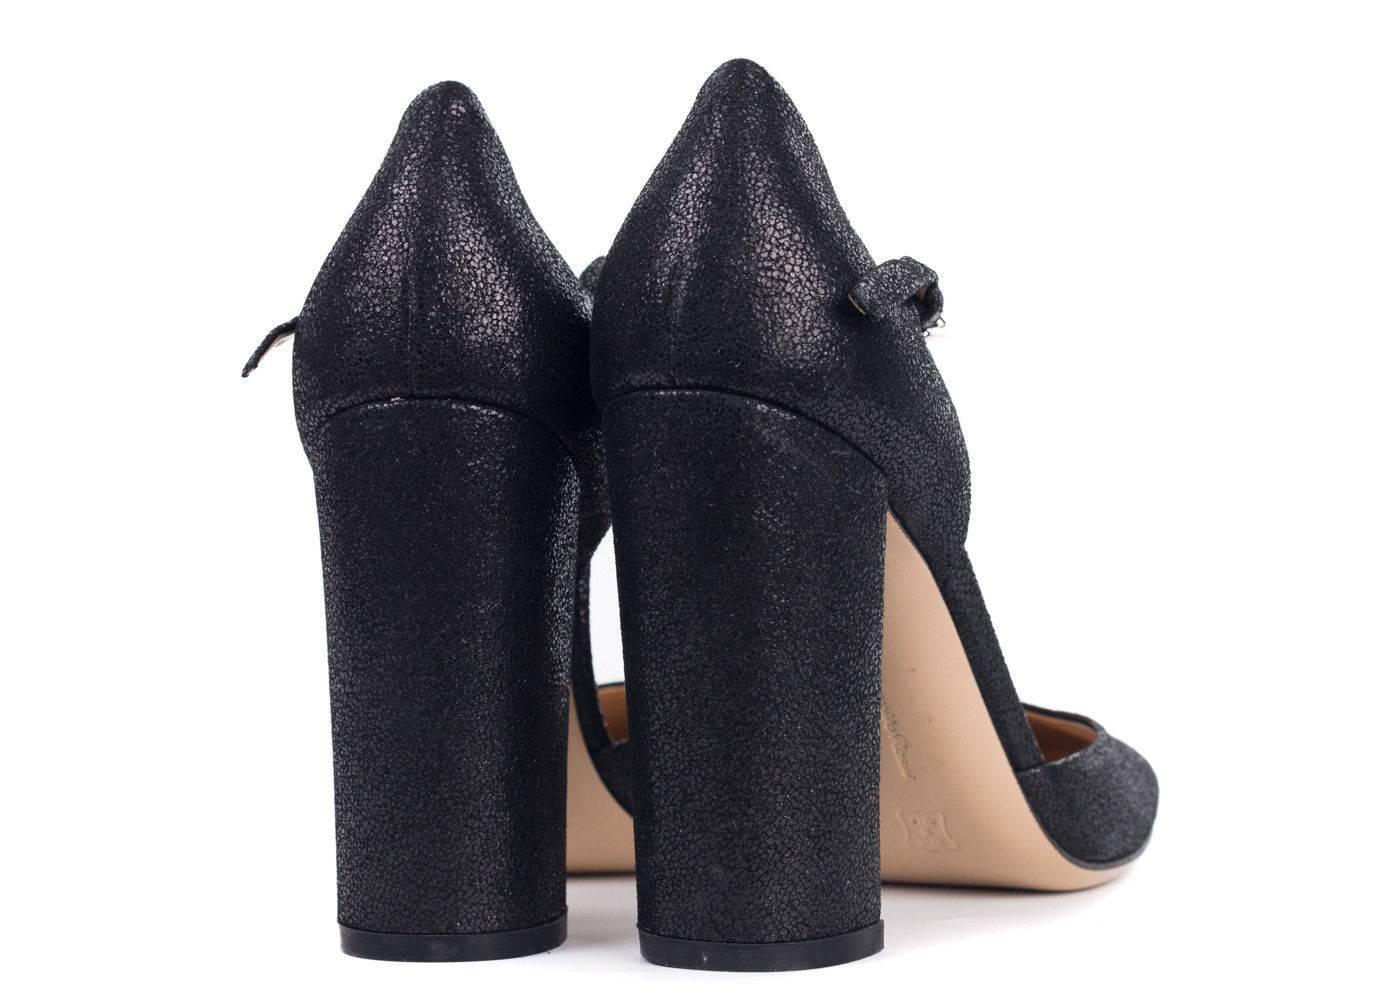 Revamp your wardrobe with a staple from Gianvito Rossi. Versatile enough for the office or day party this beautiful core silhouette features a black glitter suede, with a delicate ankle strap and high block heel. Pair with your dark ensemble for a